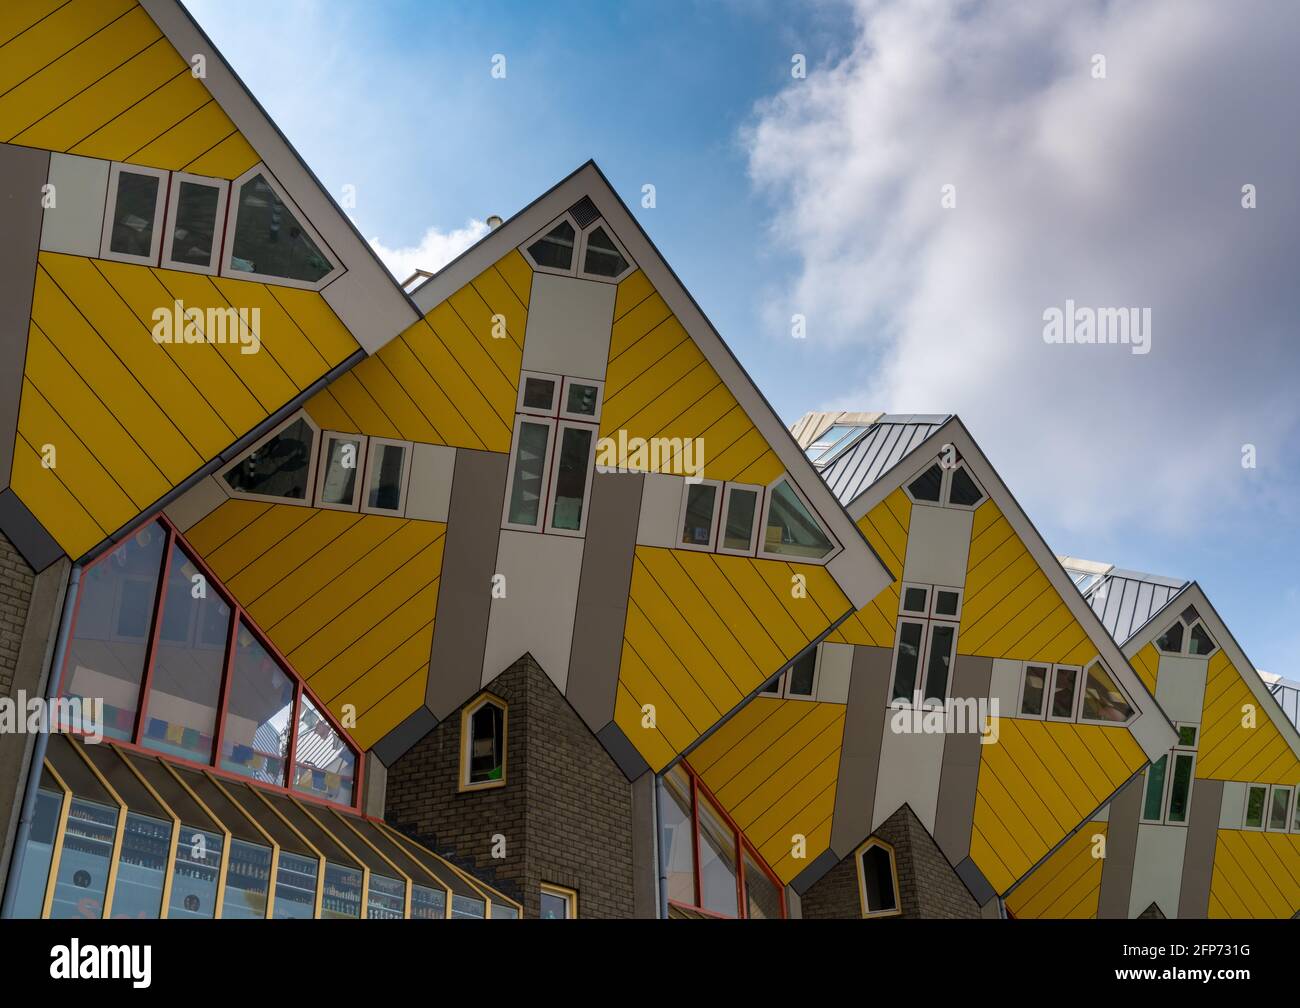 Rotterdam, Netherlands - 14 May, 2021: the iconic yellow cube houses in the city center of Rotterdam Stock Photo